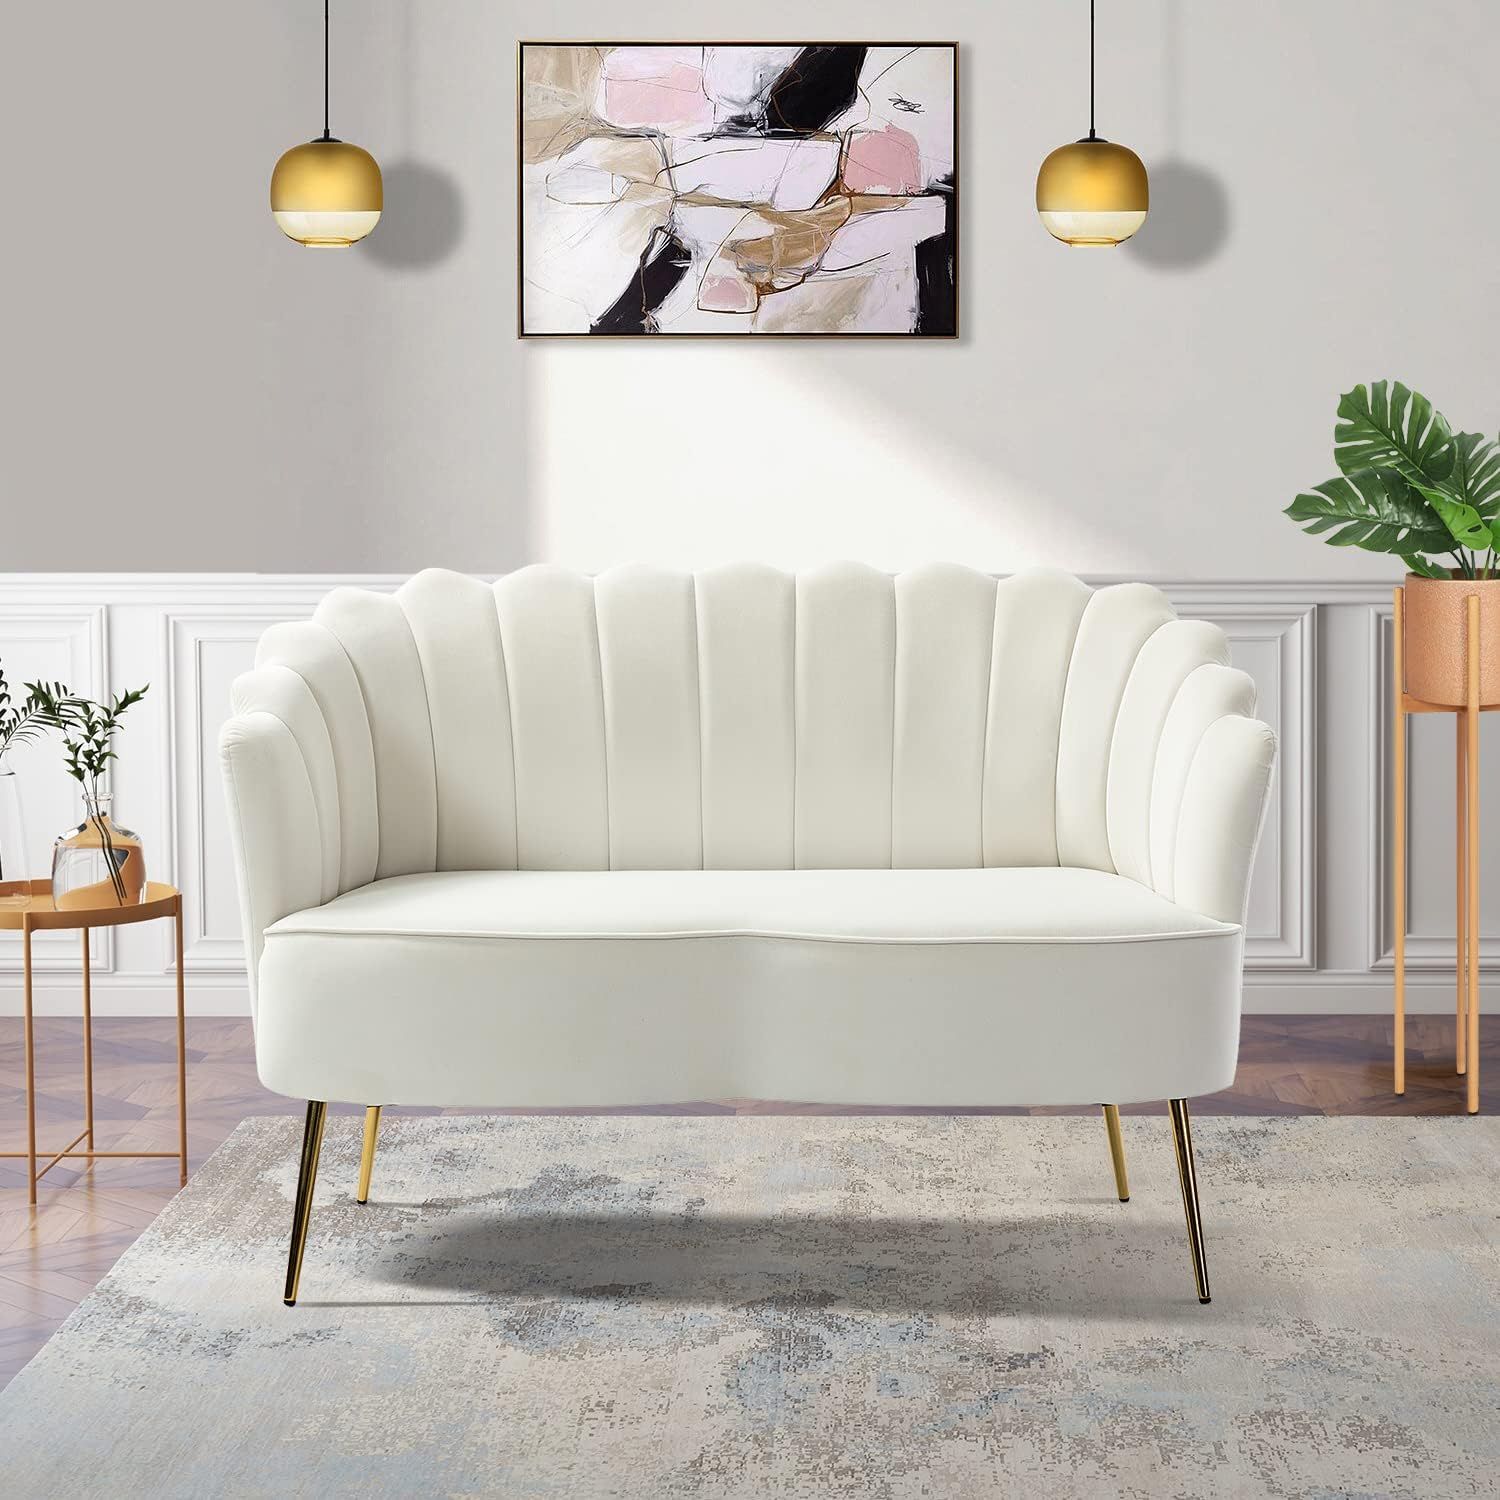 Hulala Home Velvet Loveseat Sofa With Gold Legs, Oman | Ubuy Within Small Love Seats In Velvet (View 8 of 15)